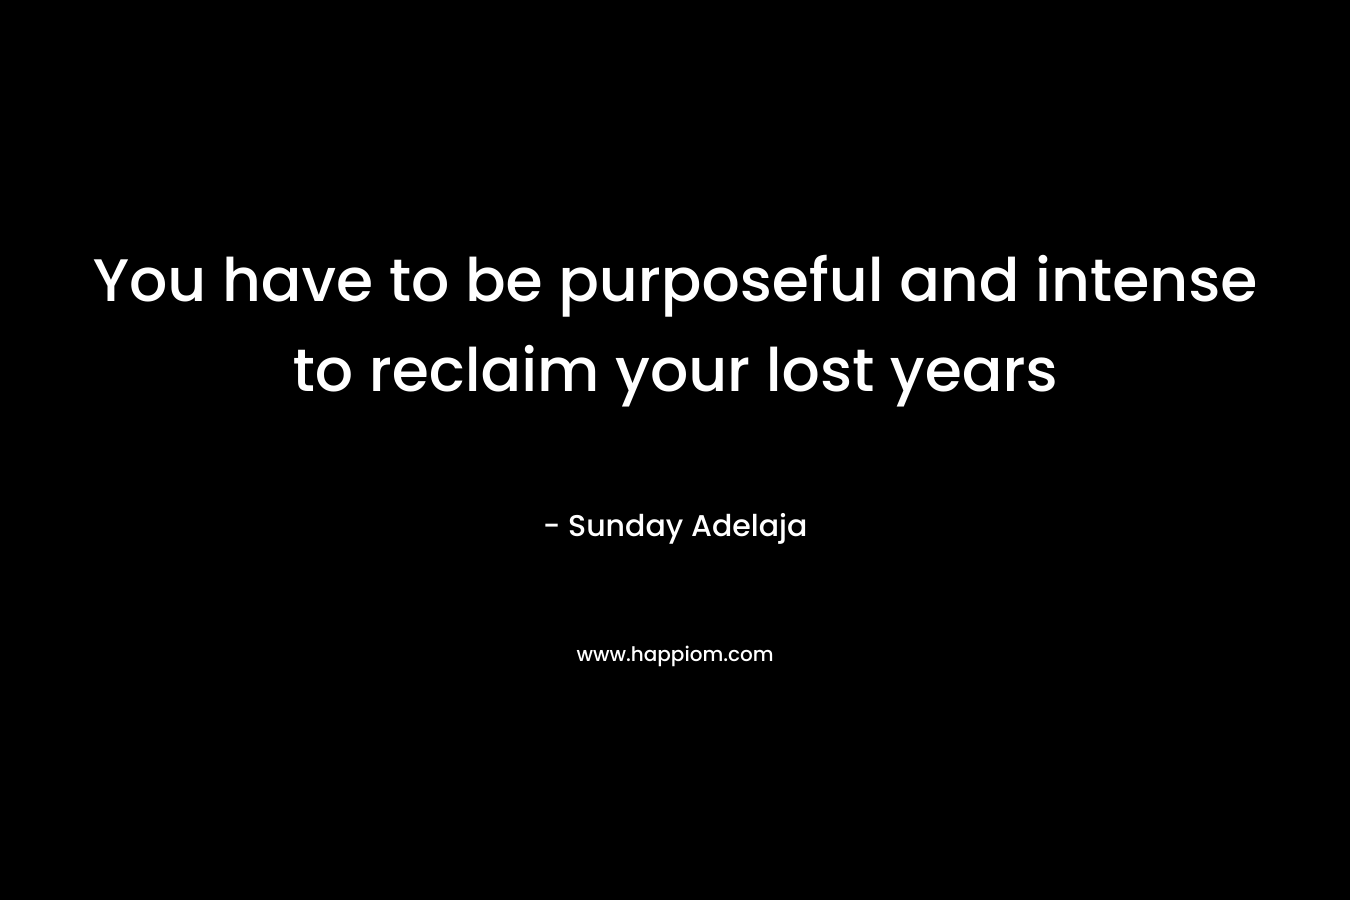 You have to be purposeful and intense to reclaim your lost years